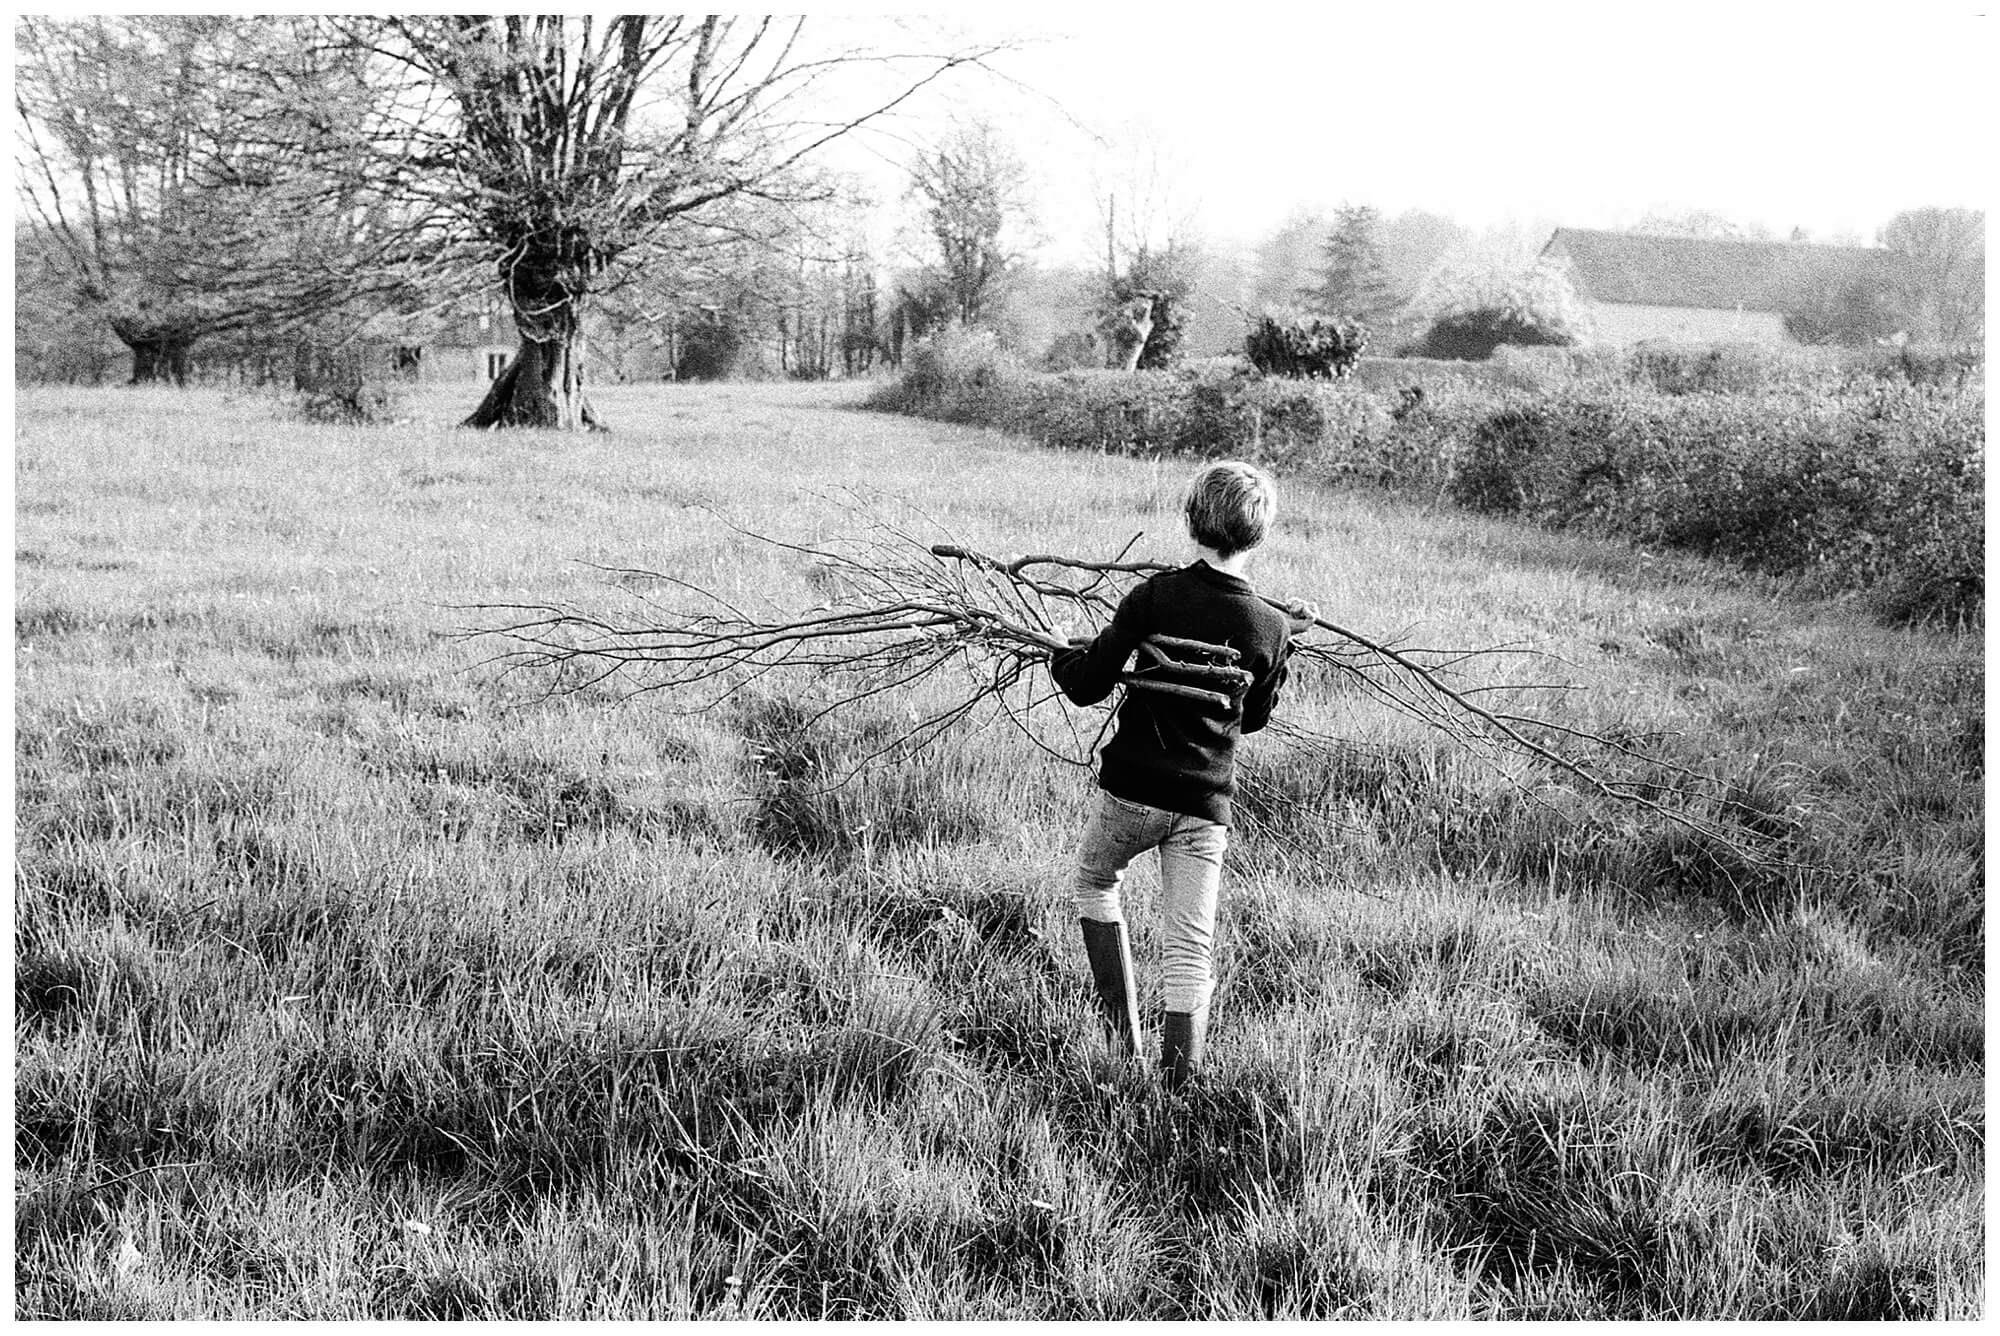 A young boy hauls two large tree branches through a grassy field in the French countryside.